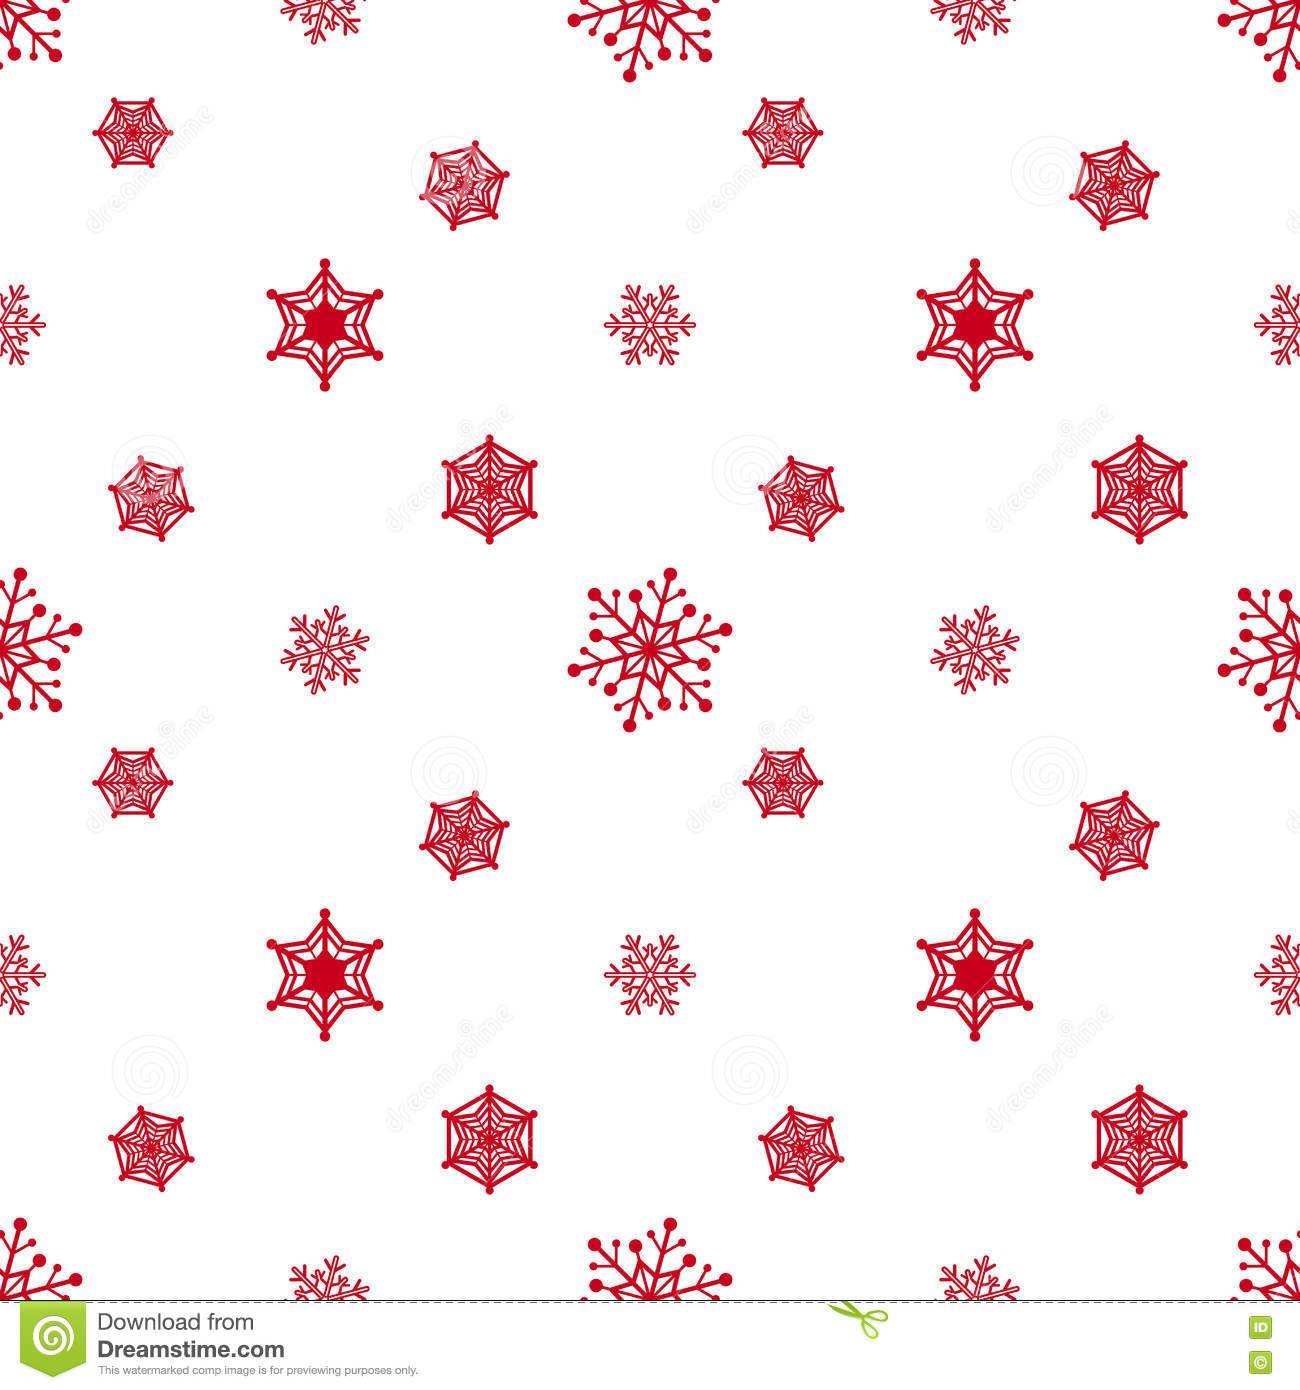 Snowflake red white background stock vector